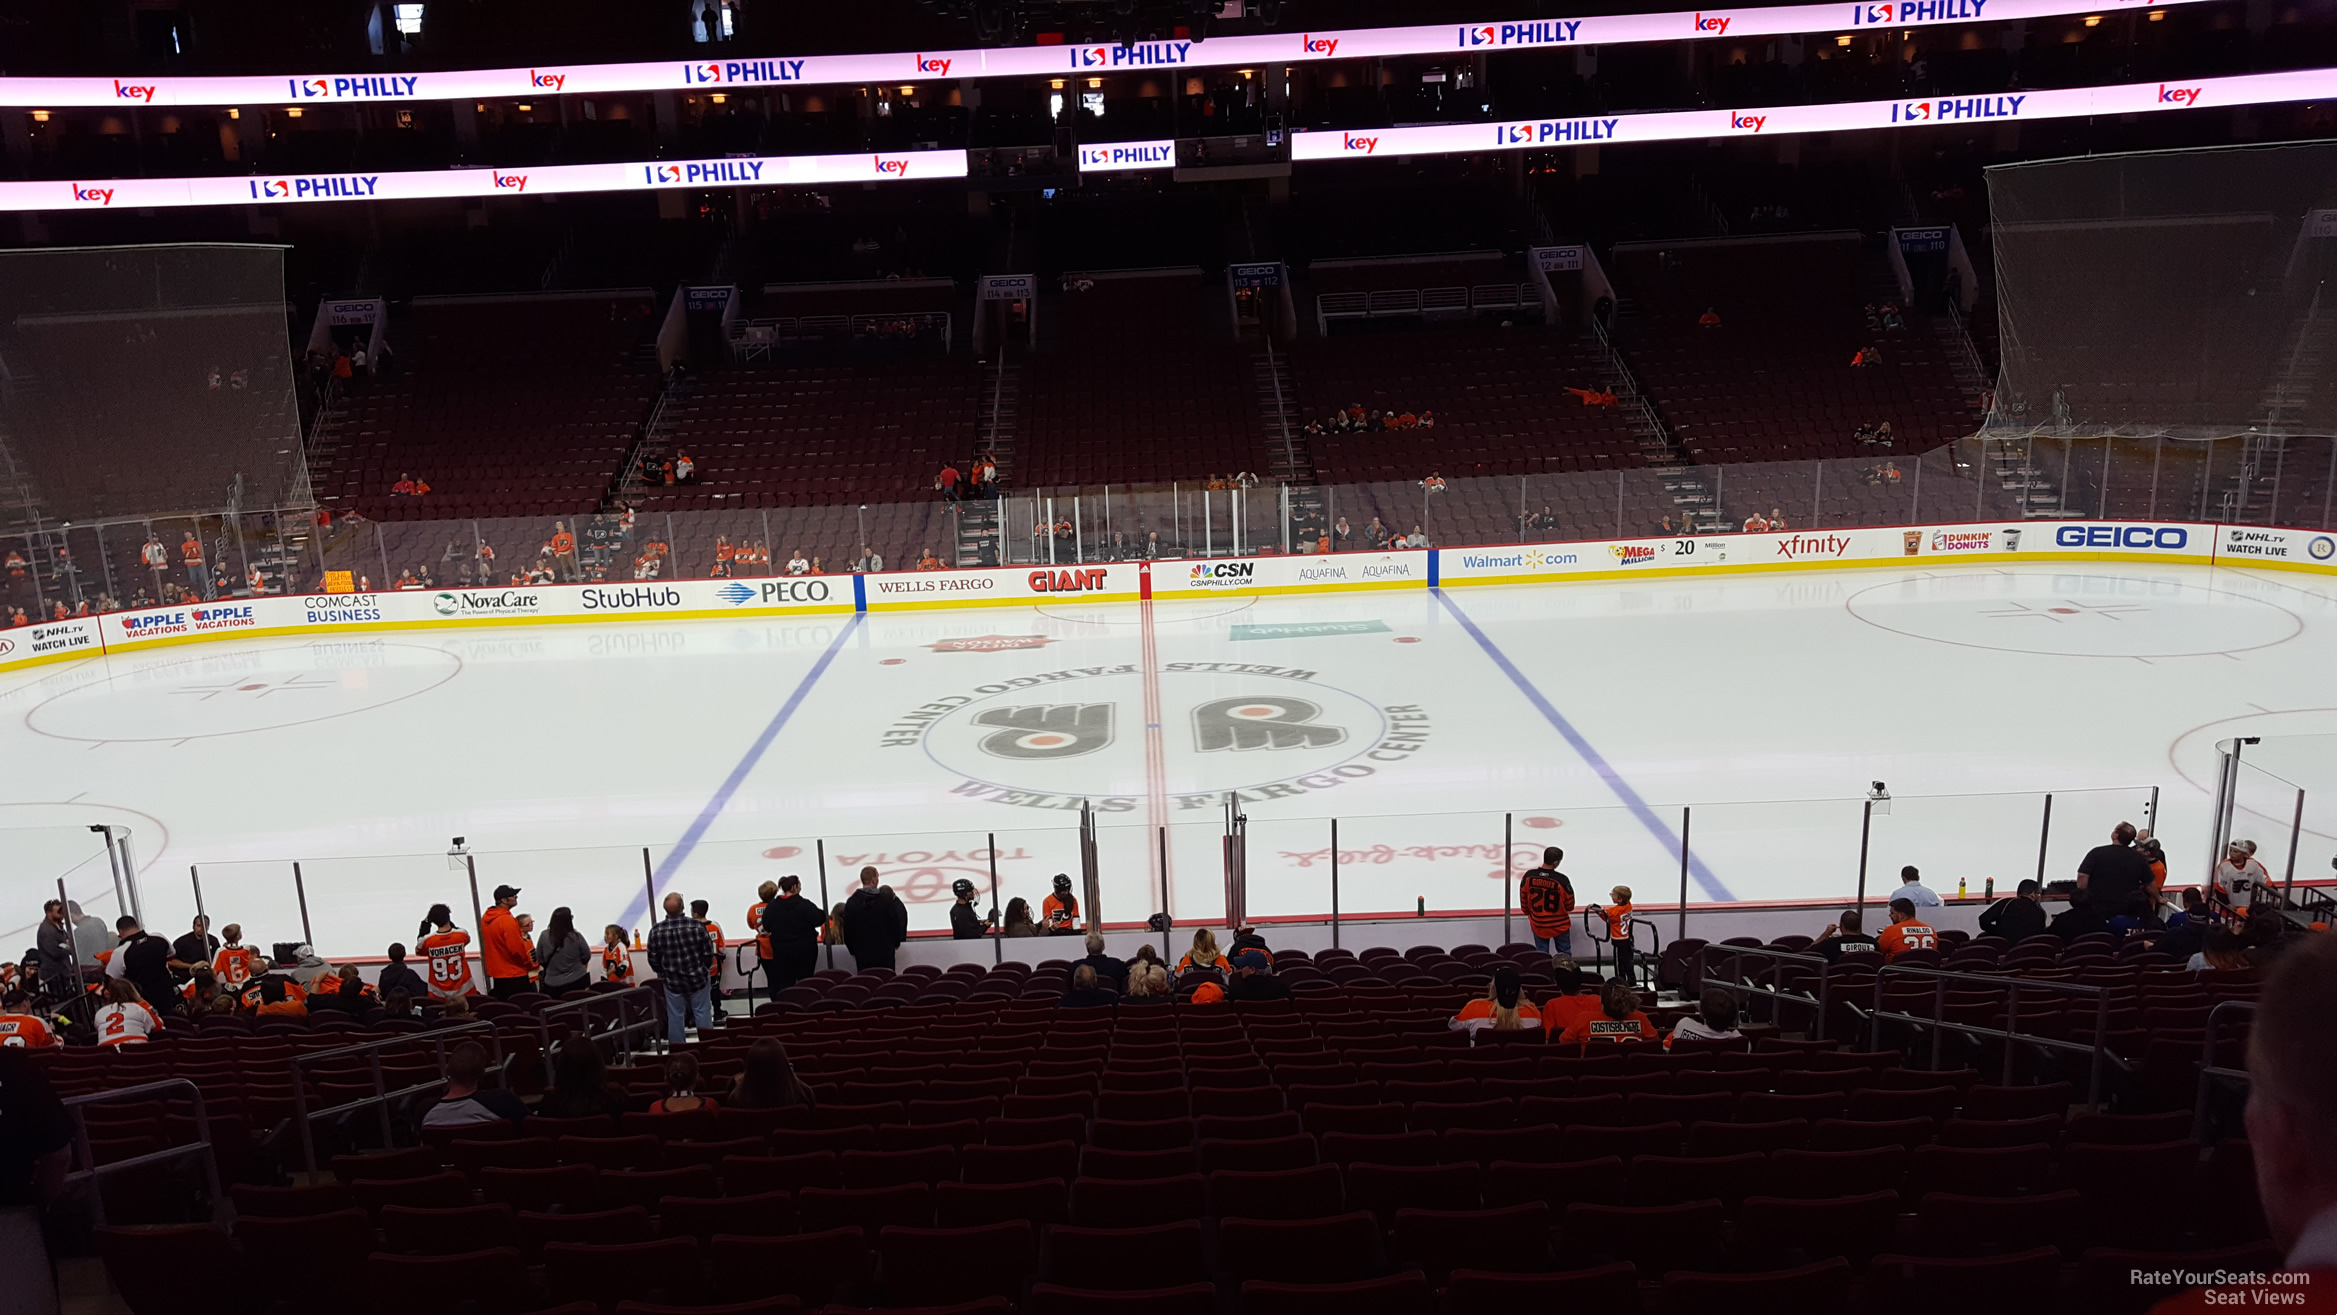 Philadelphia Flyers Seating Chart With Rows